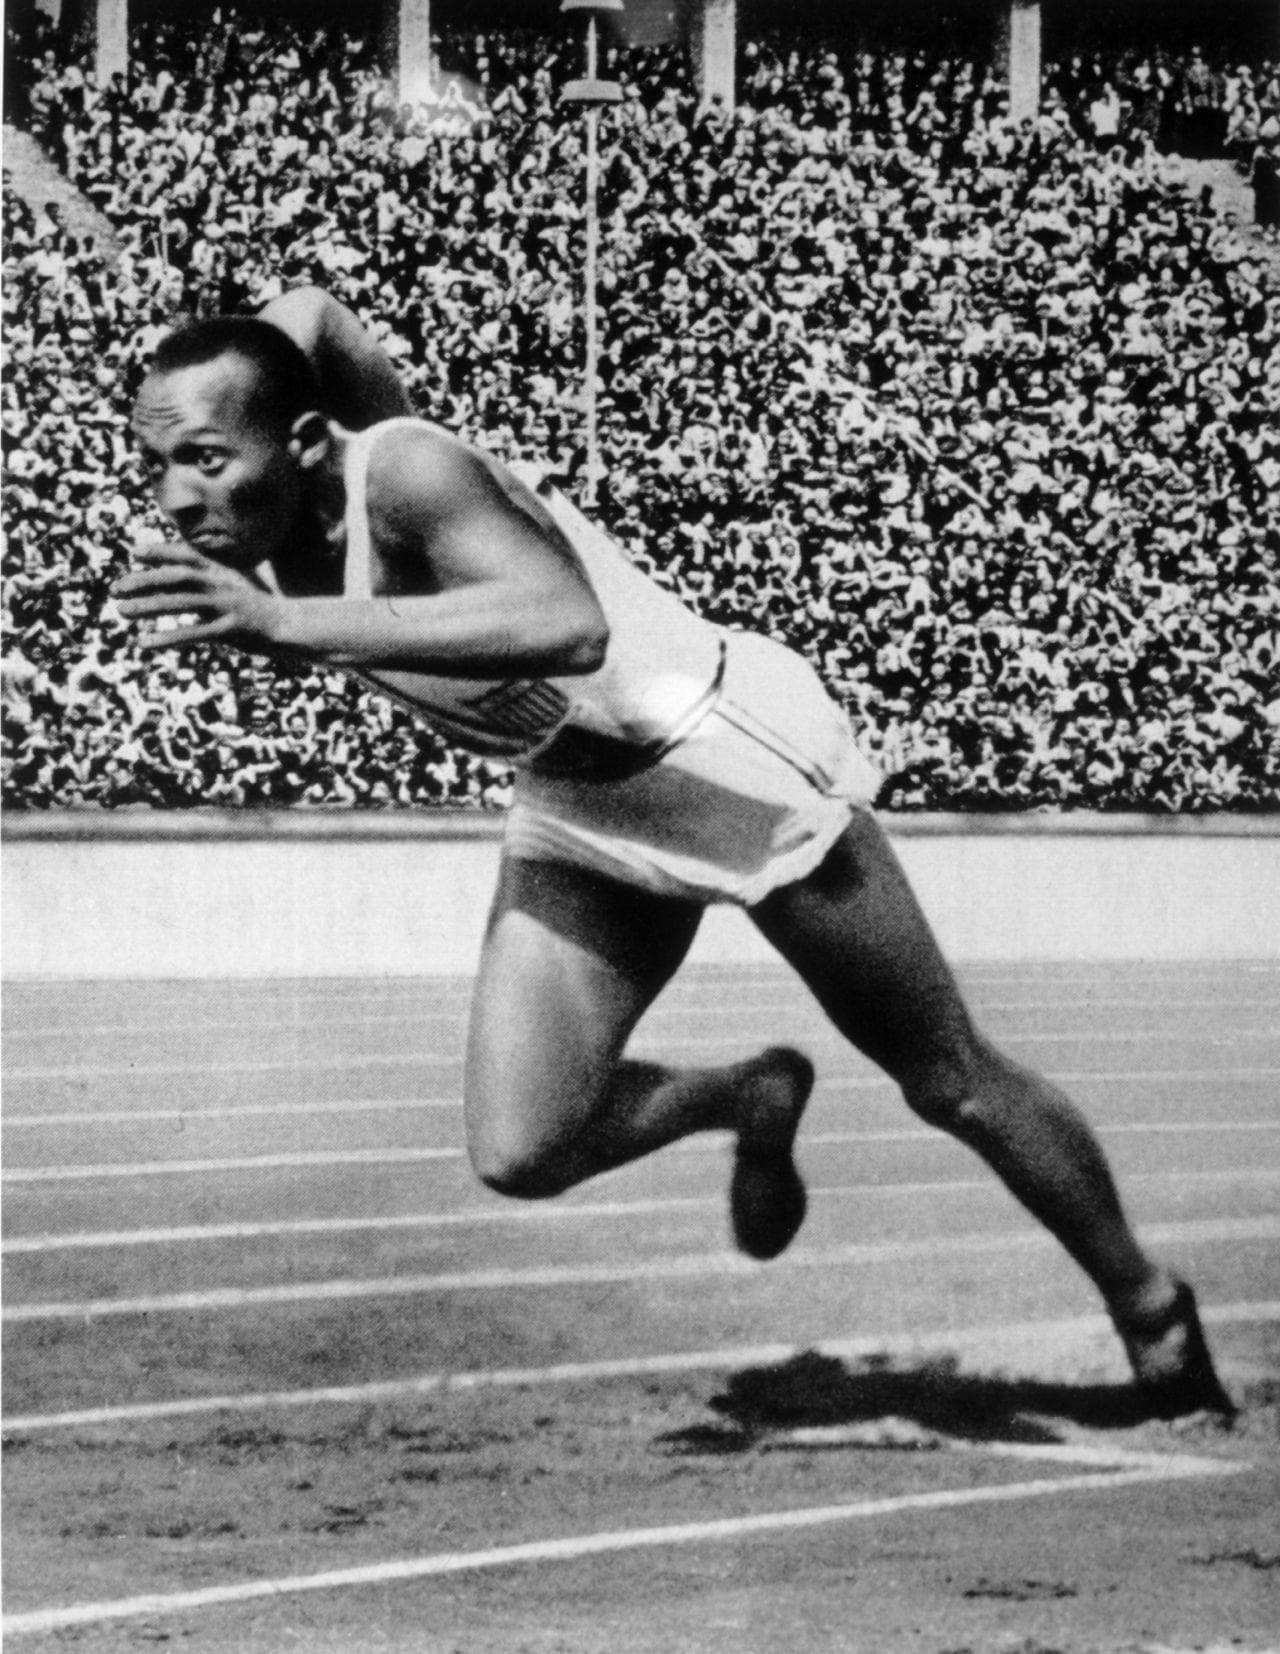 Jesse Owens won the 100m final, 200m final, the long jump and was on the winning US 4x100m relay team. (Getty Images)